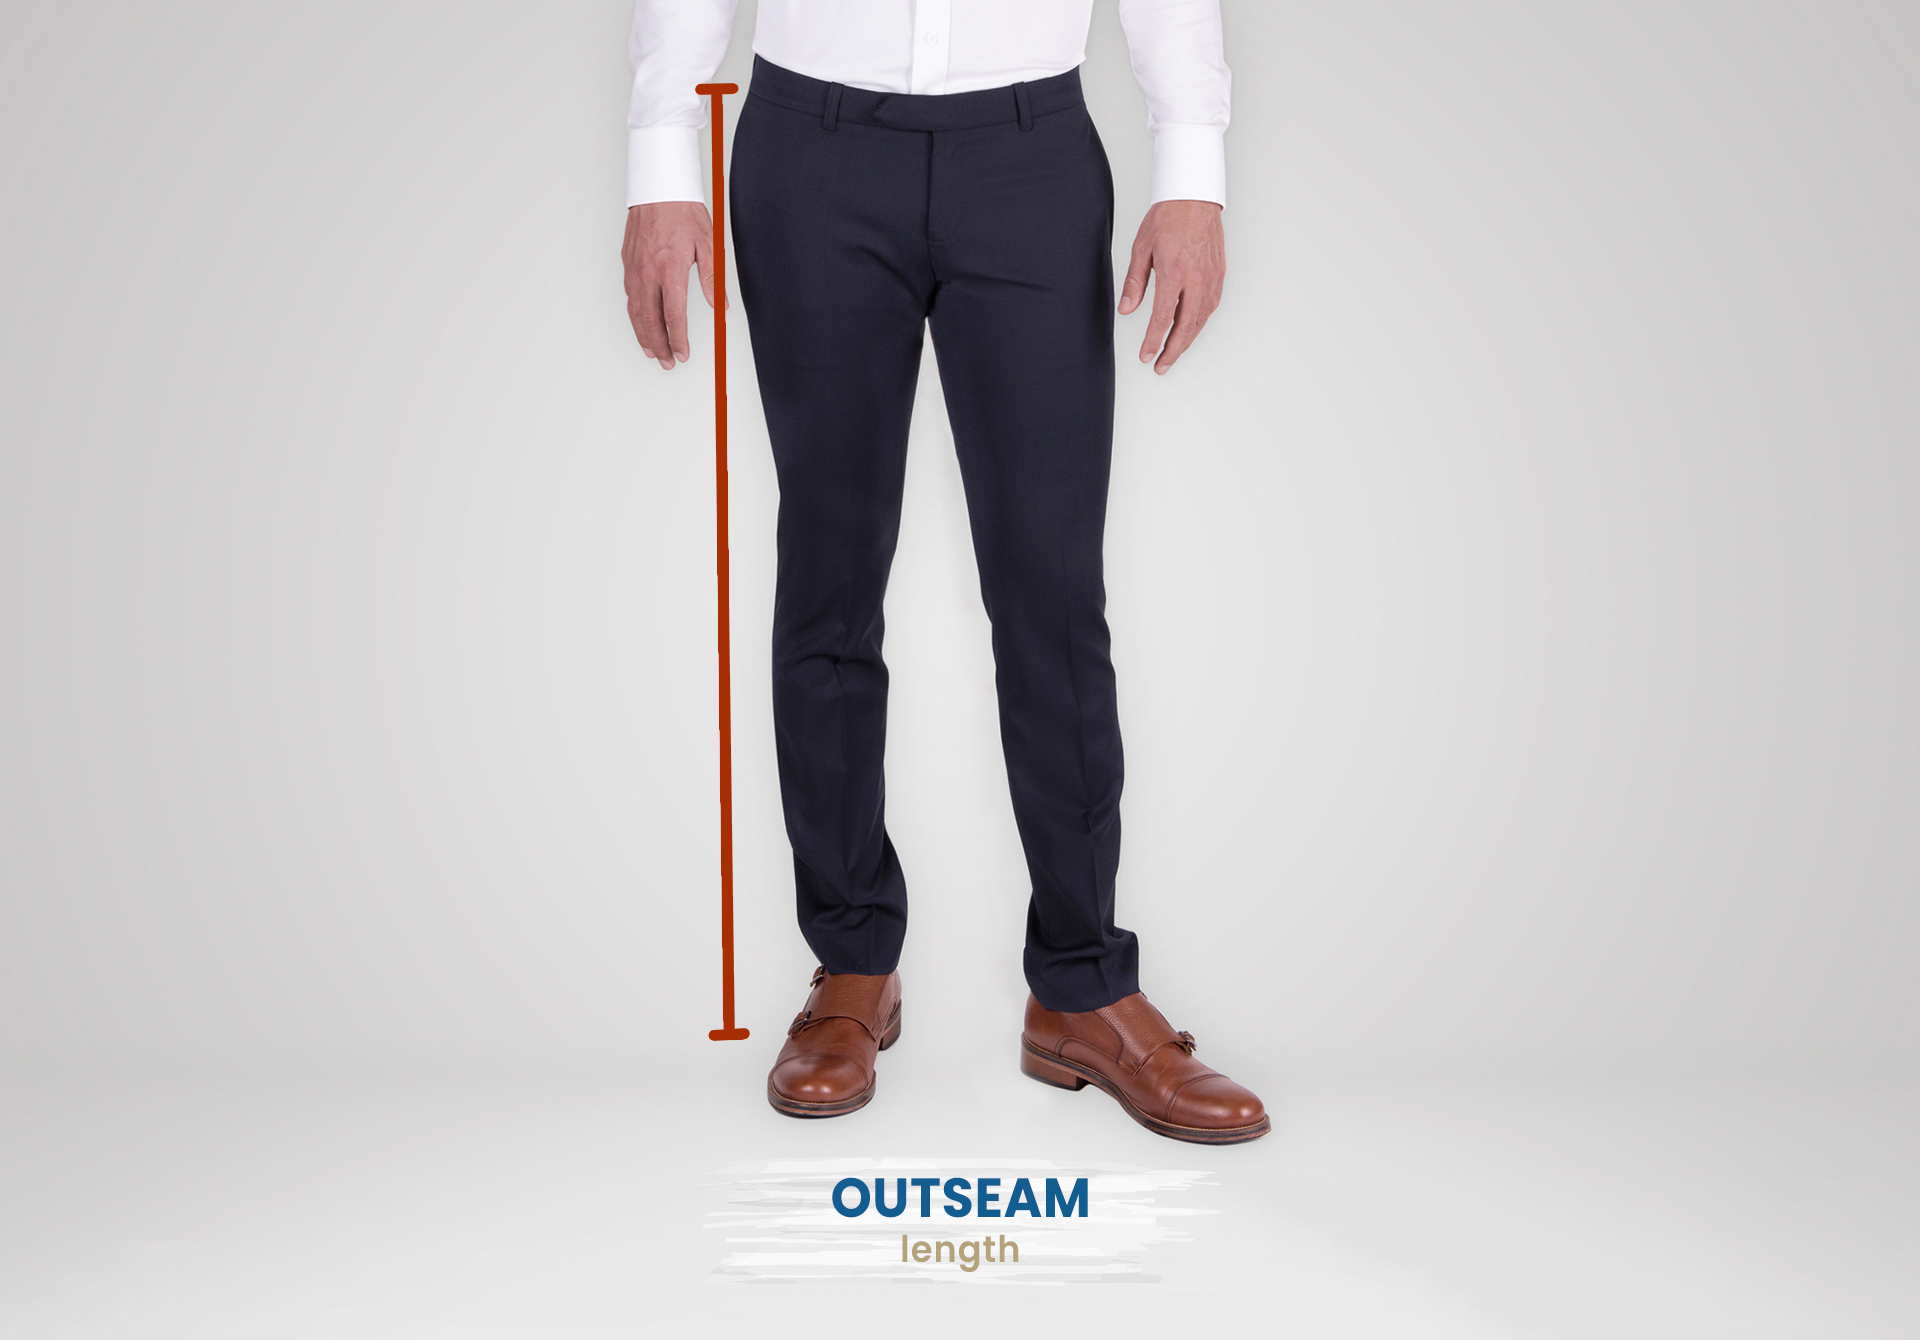 how to measure pants' outseam length